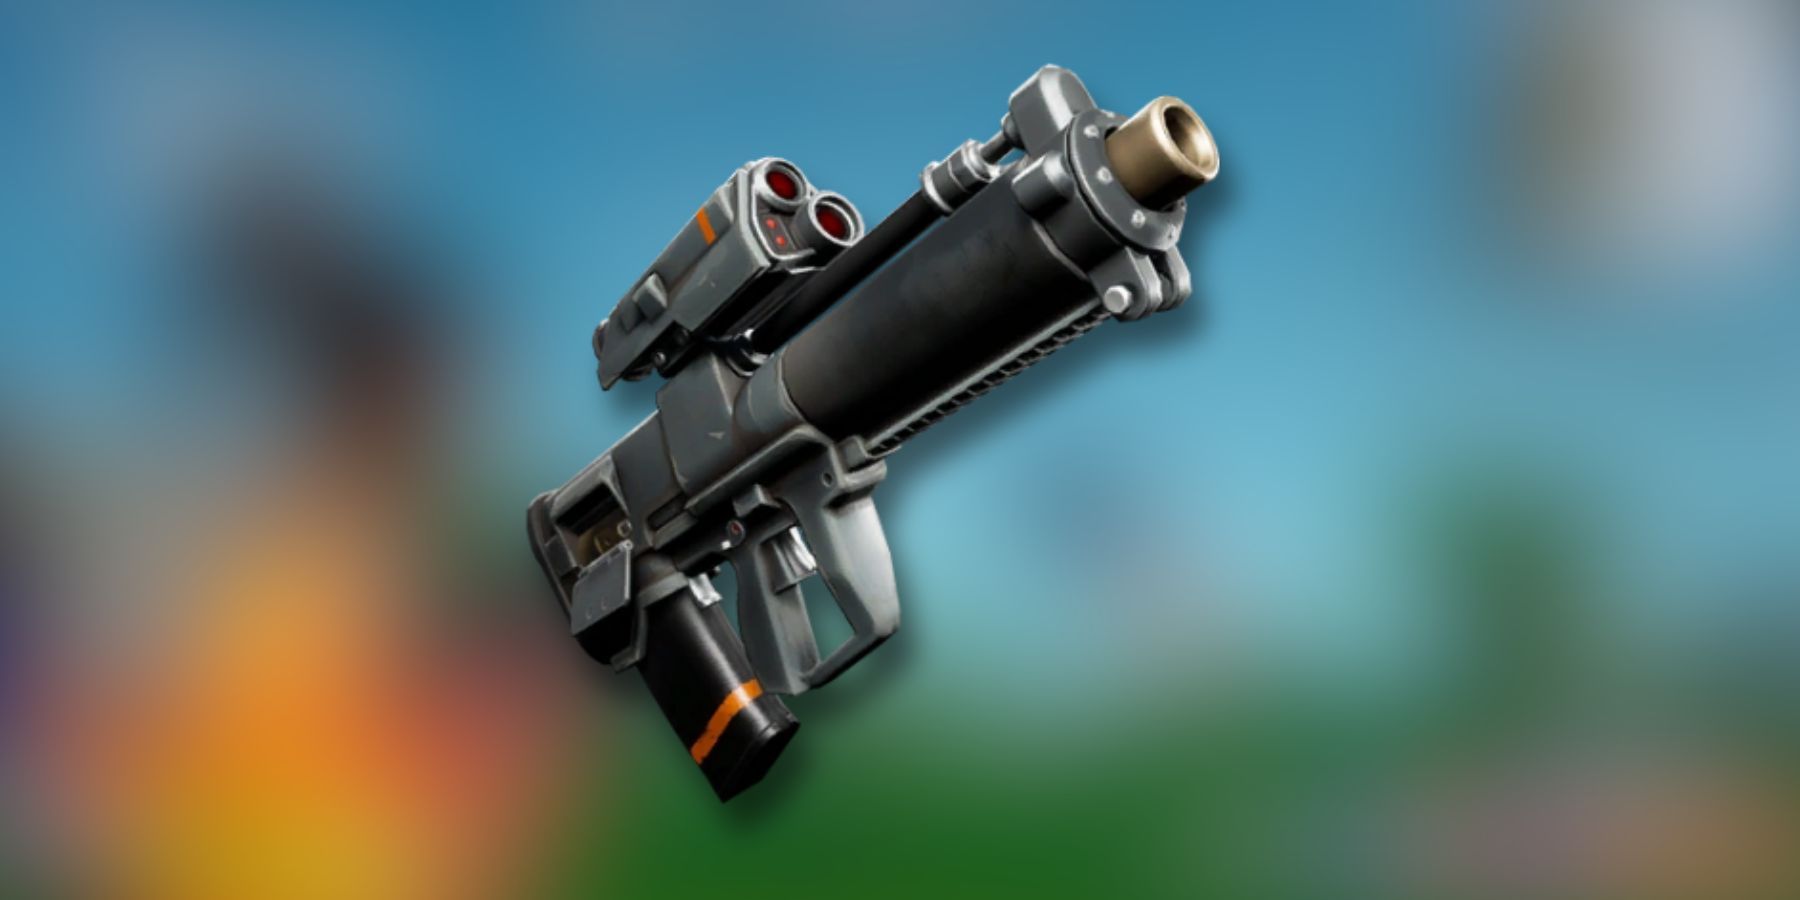 How to Get and Use Proximity Grenade Launcher in Fortnite OG